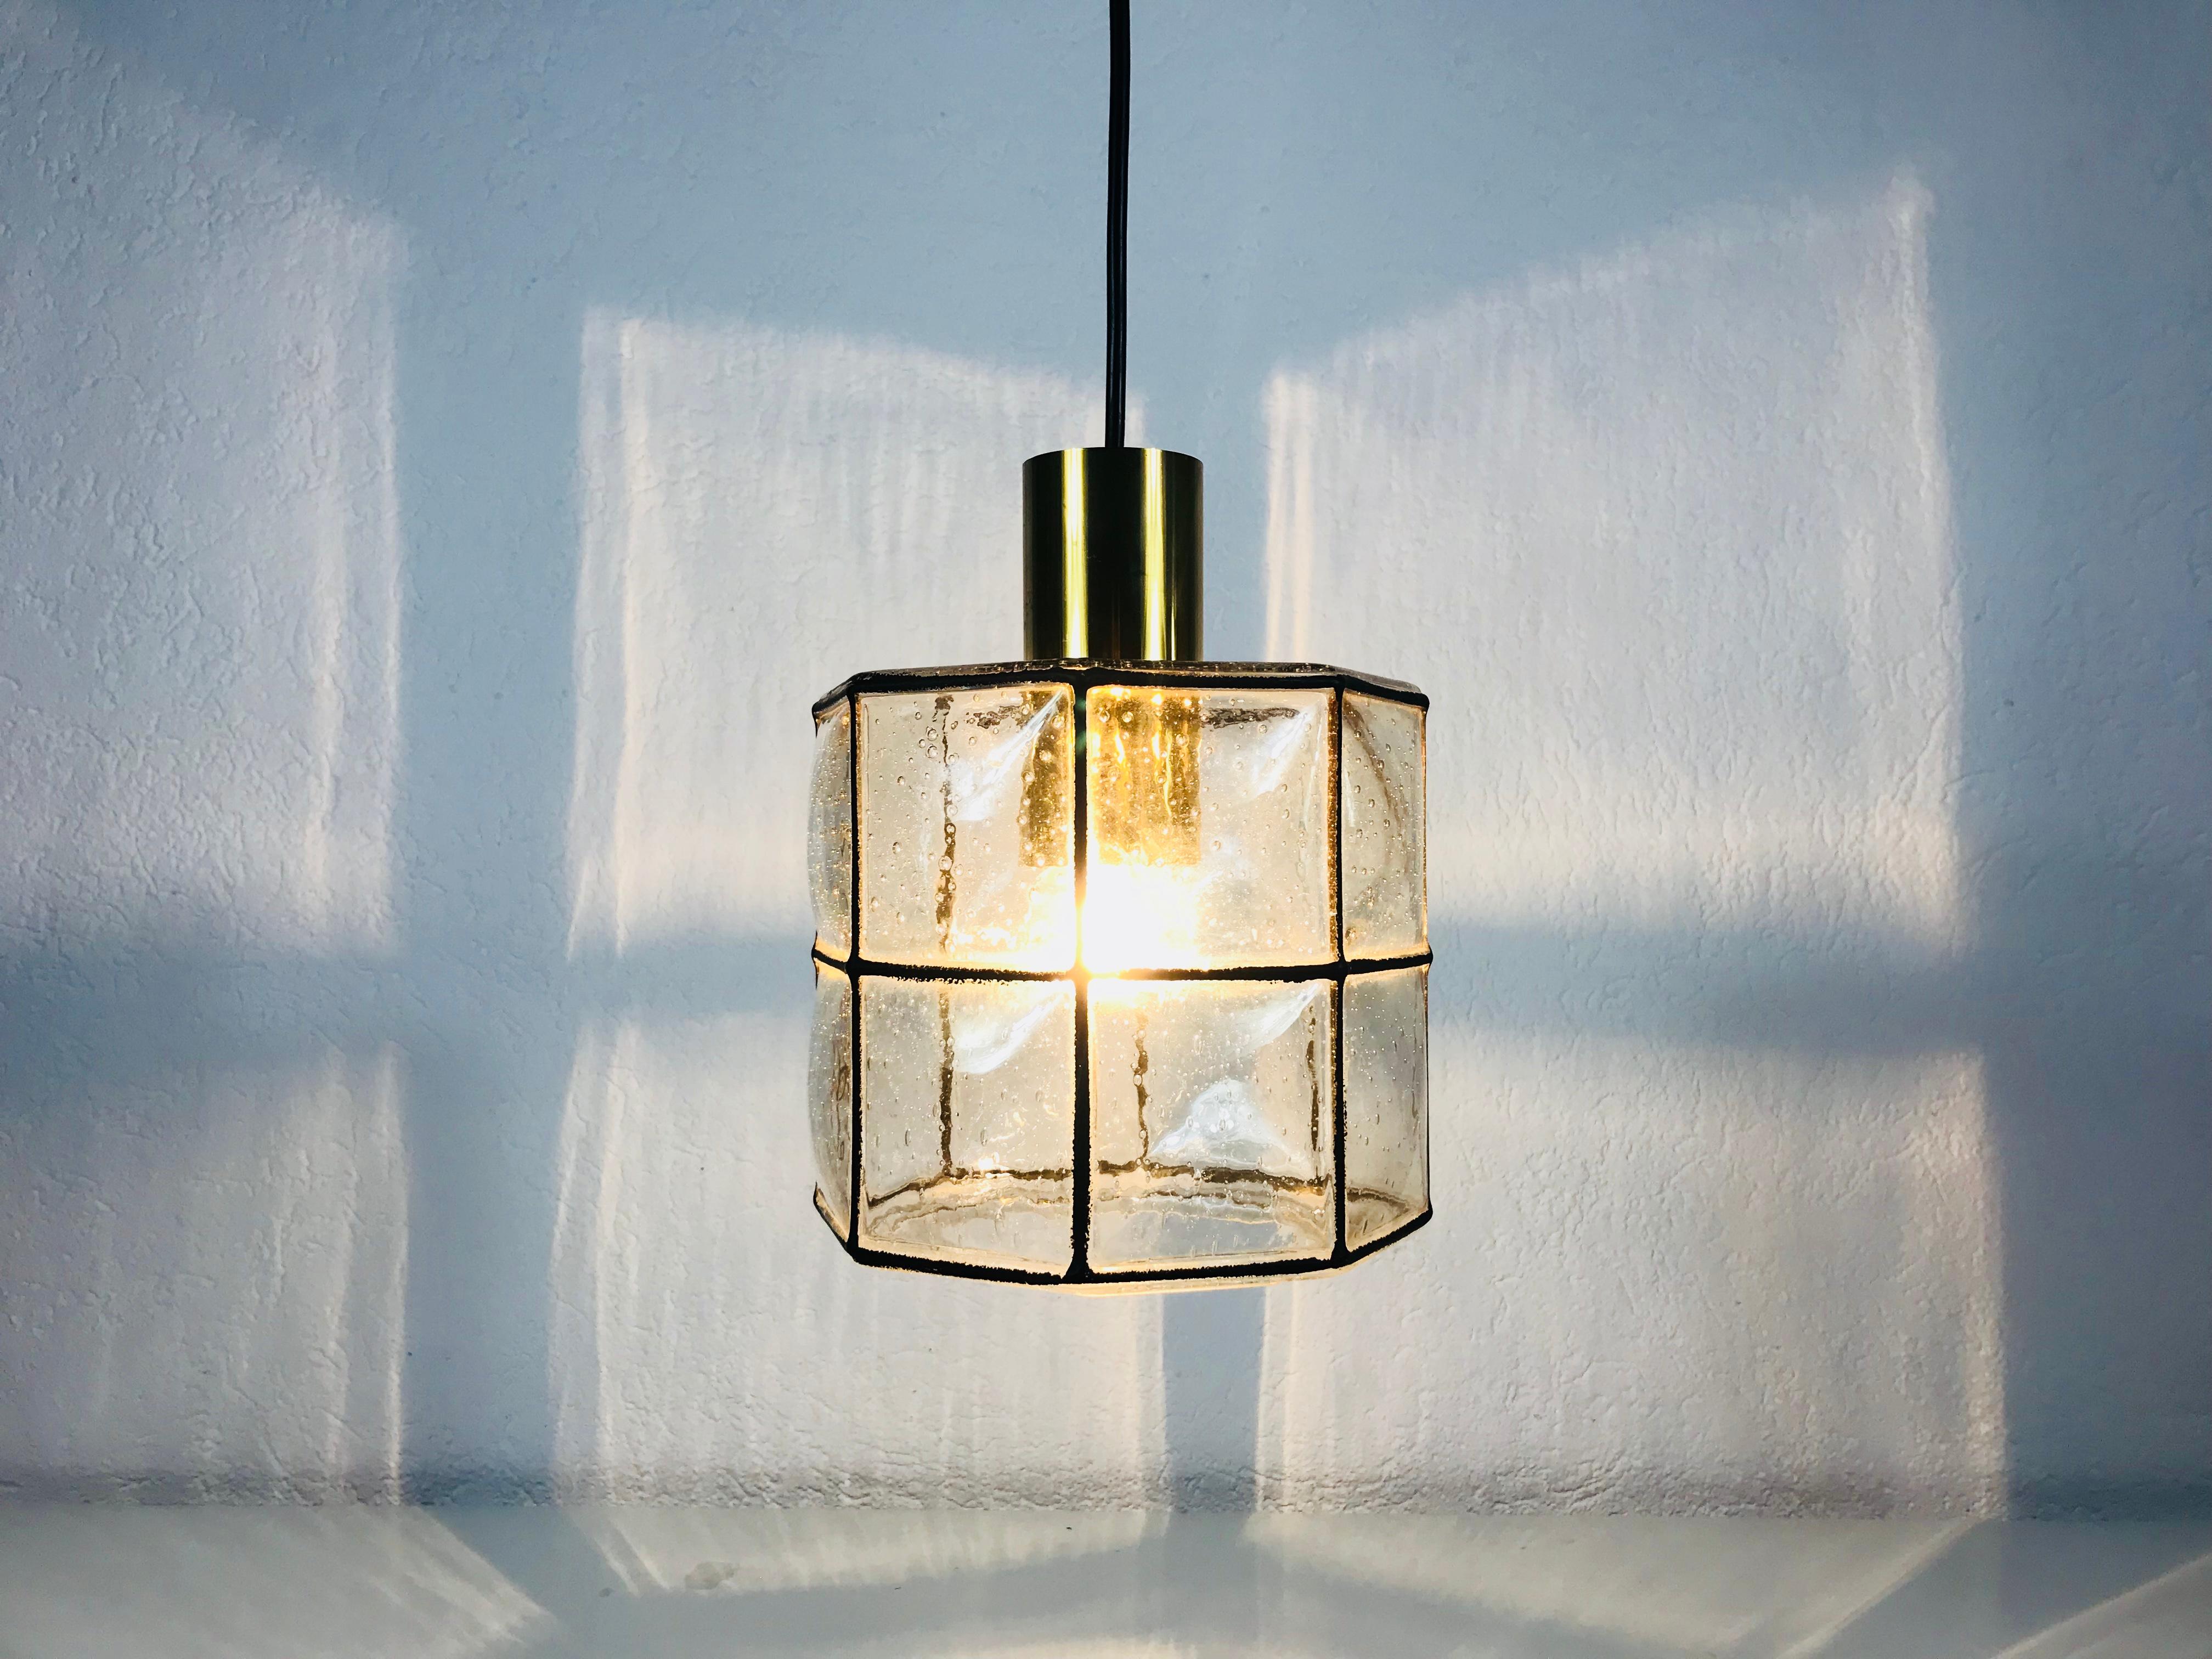 A Mid-Century Modern pendant lamp by Glashütte Limburg made in the 1960s in Germany. It is fascinating with its beautiful square shape and bubble glass. The fixture has a very nice Minimalist design.

The light requires one E27 light bulb.